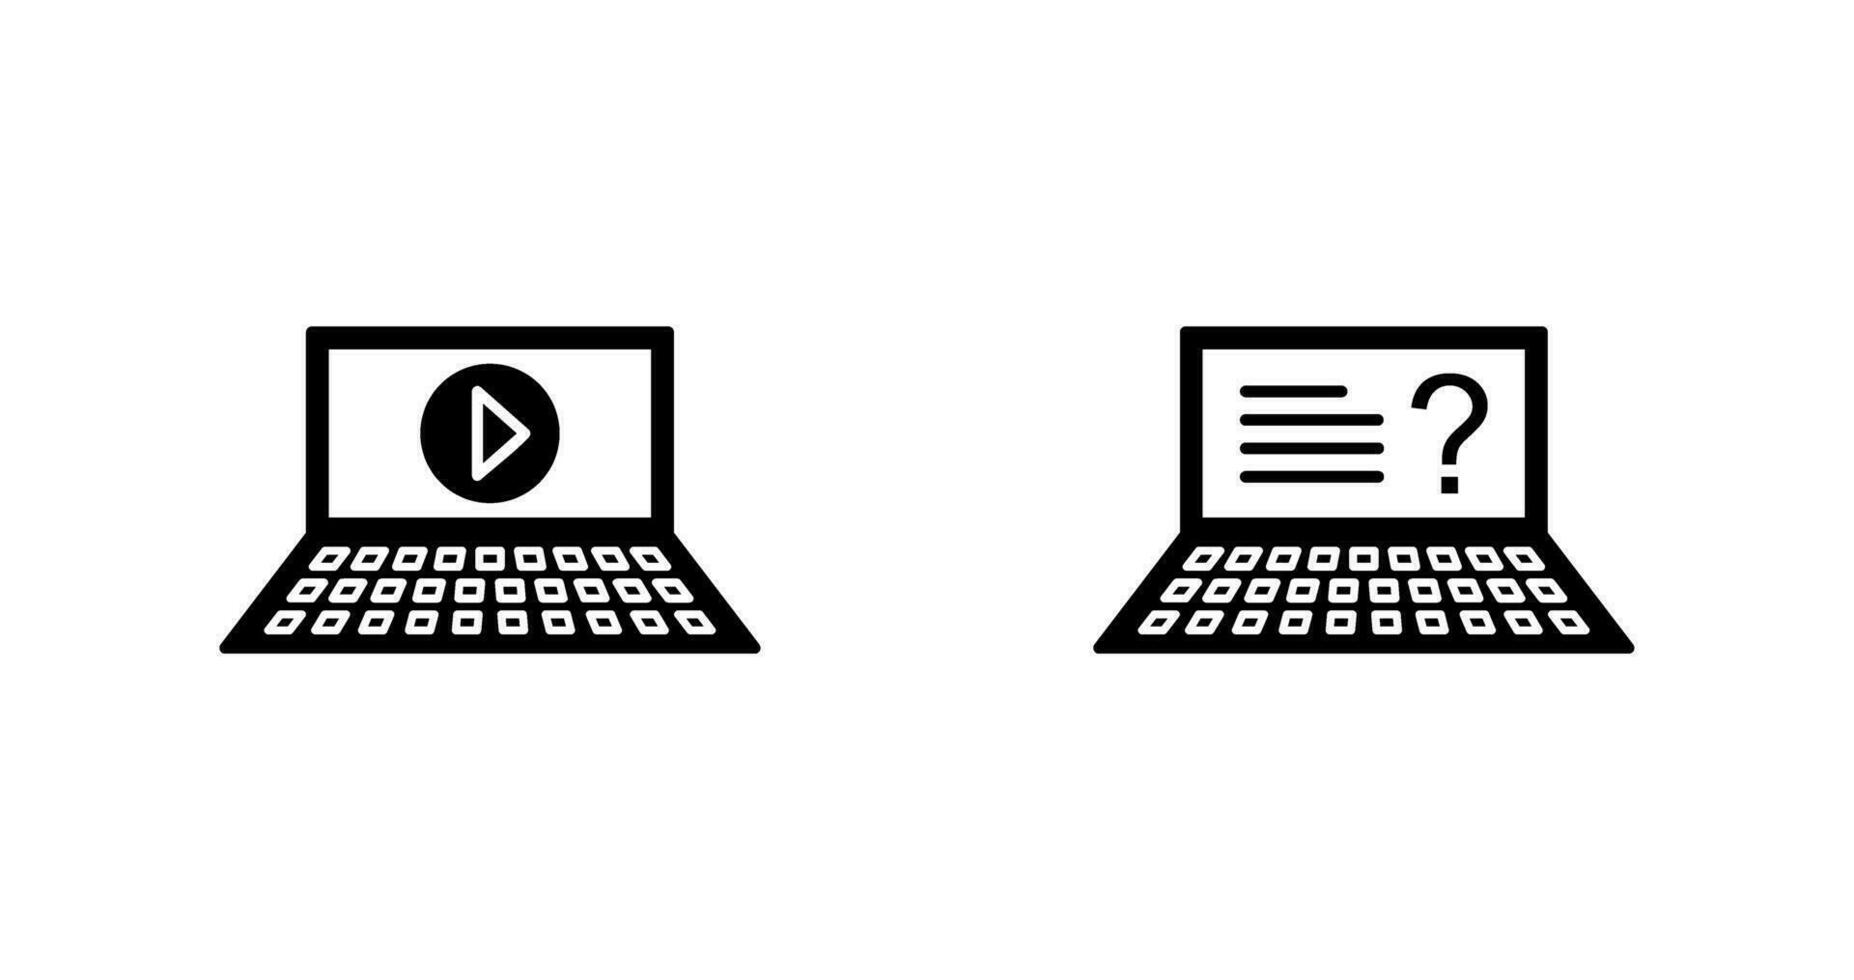 Play Video and Online Exam Icon vector